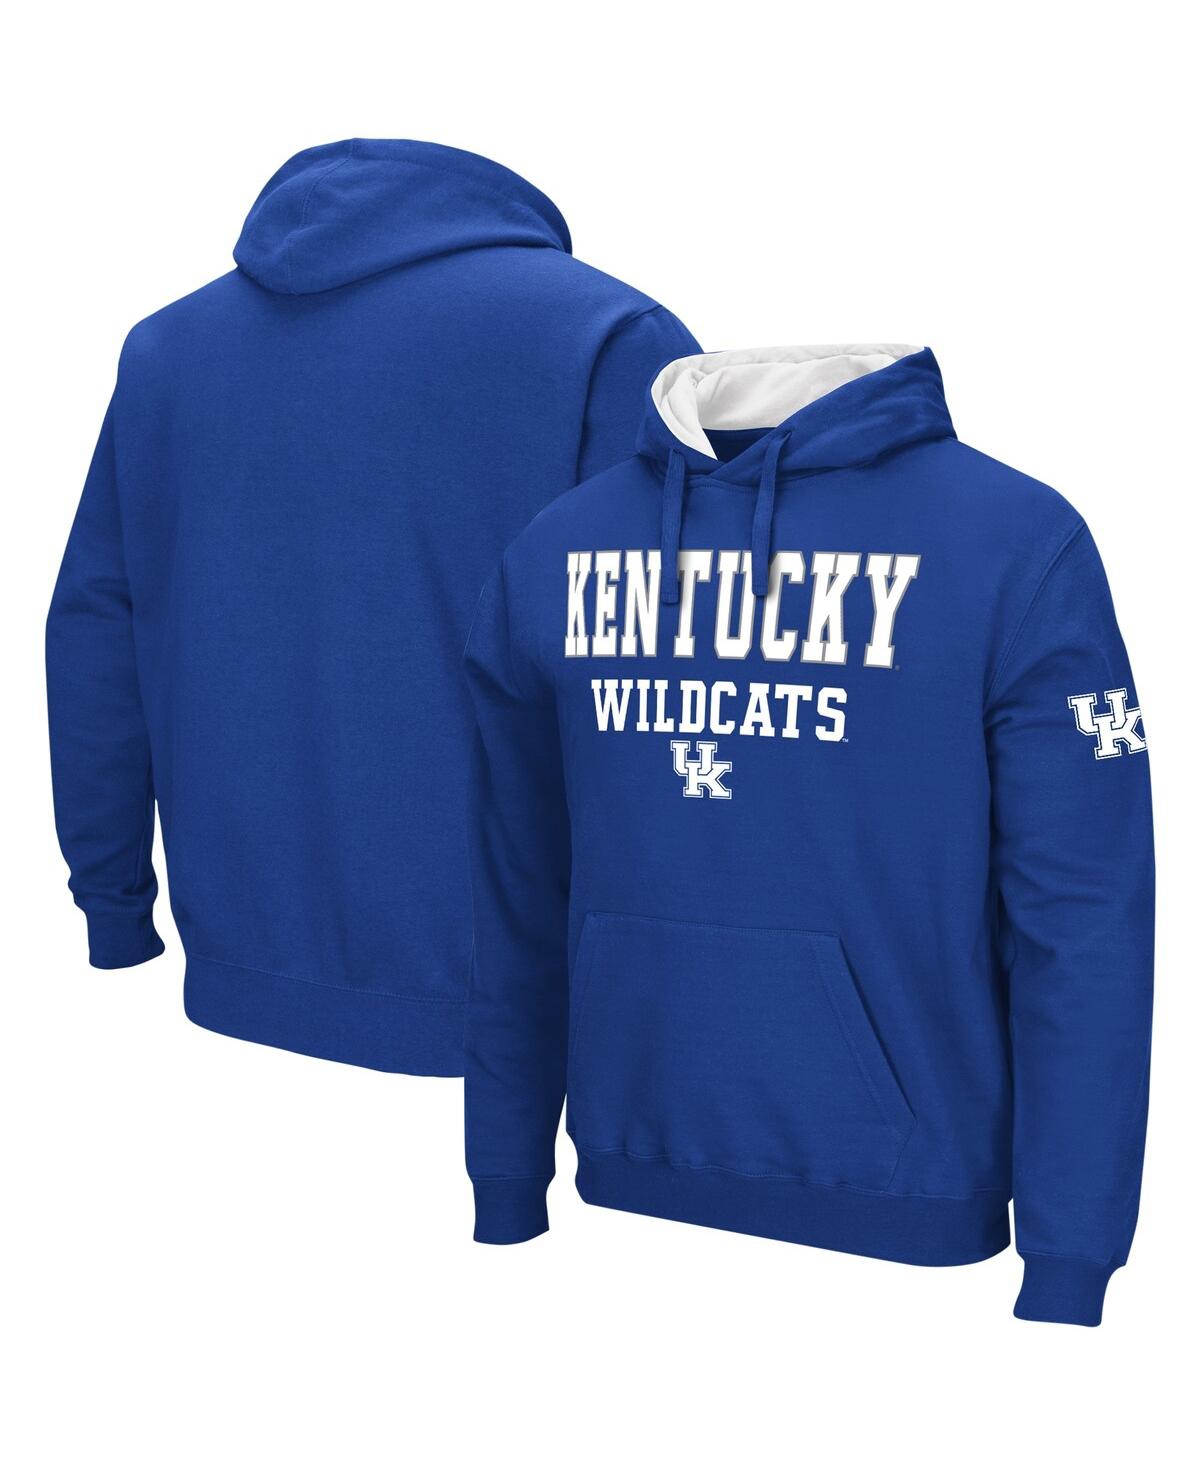 Men's Colosseum Royal Kentucky Wildcats Sunrise Pullover Hoodie - Royal